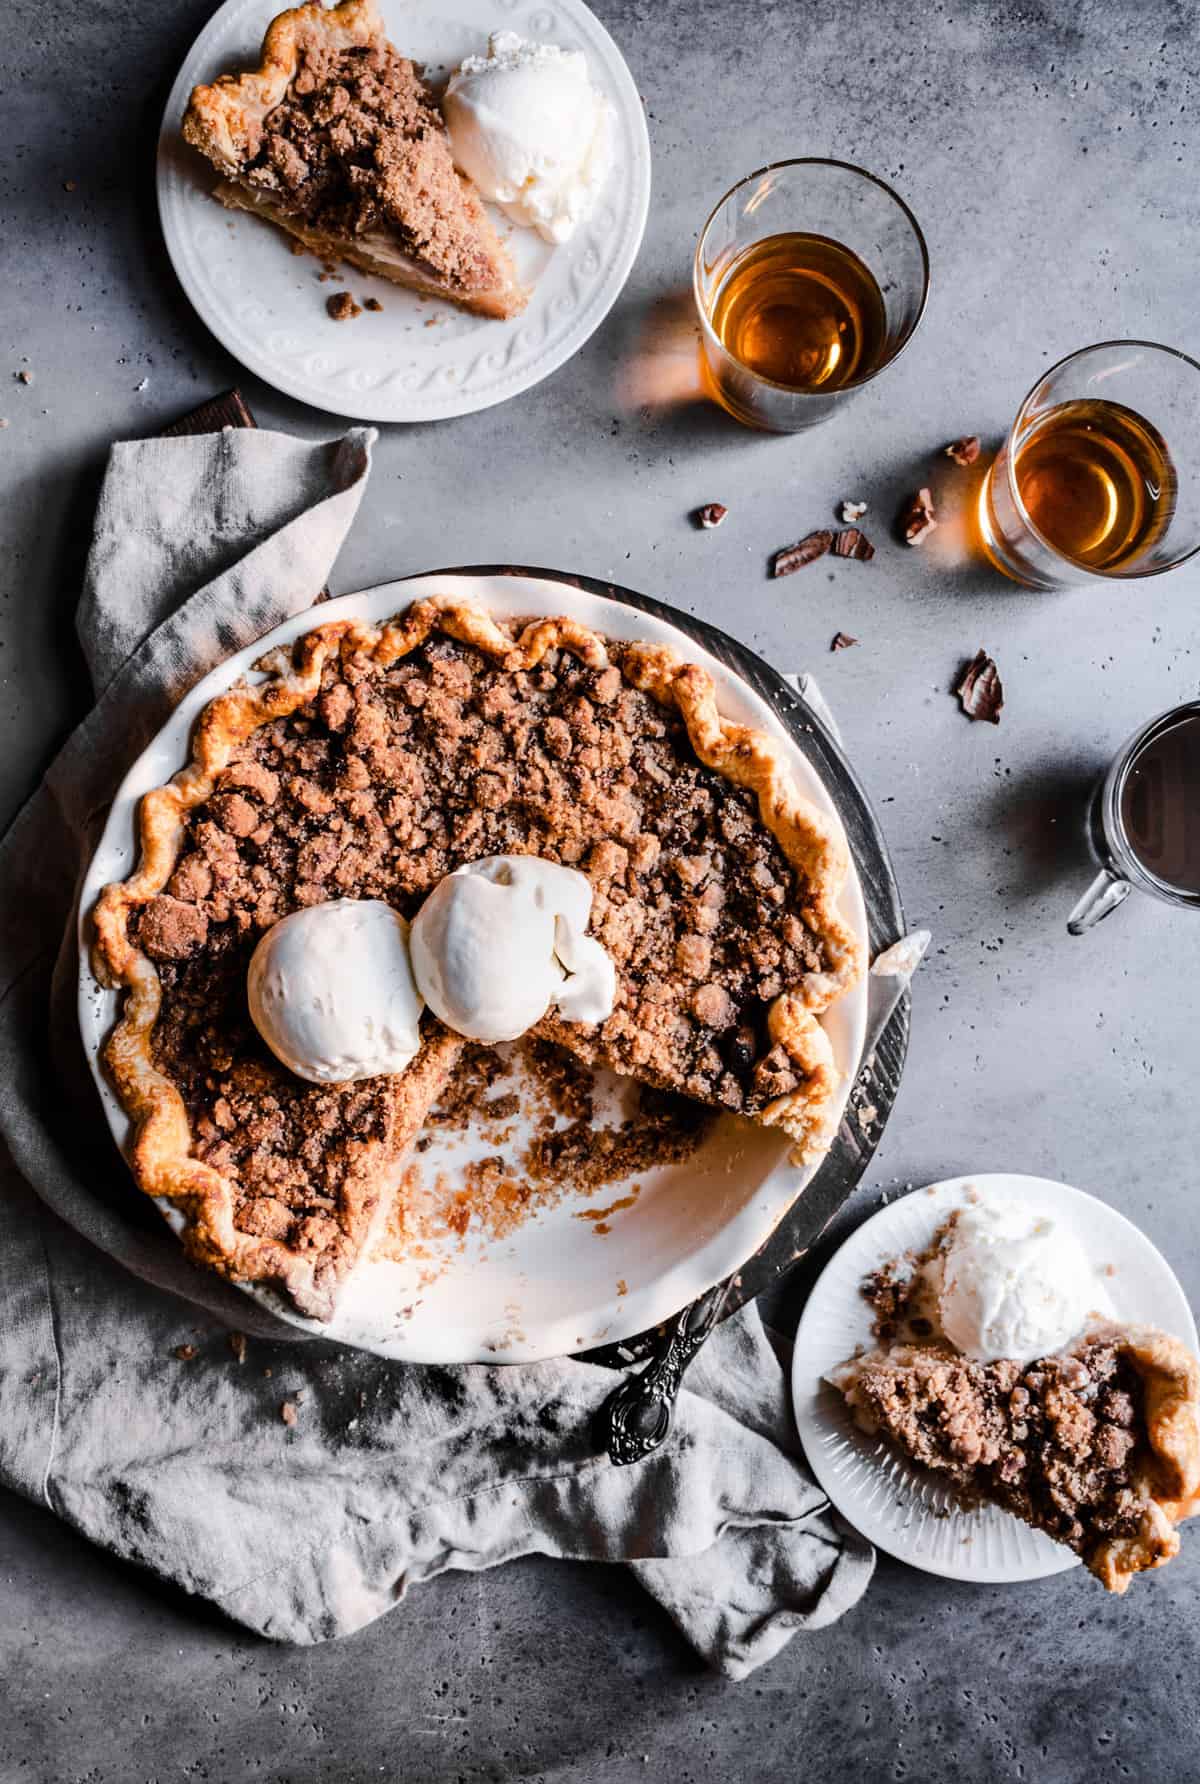 Pear pie with pecan cinnamon streusel topped with Tillamook ice cream.